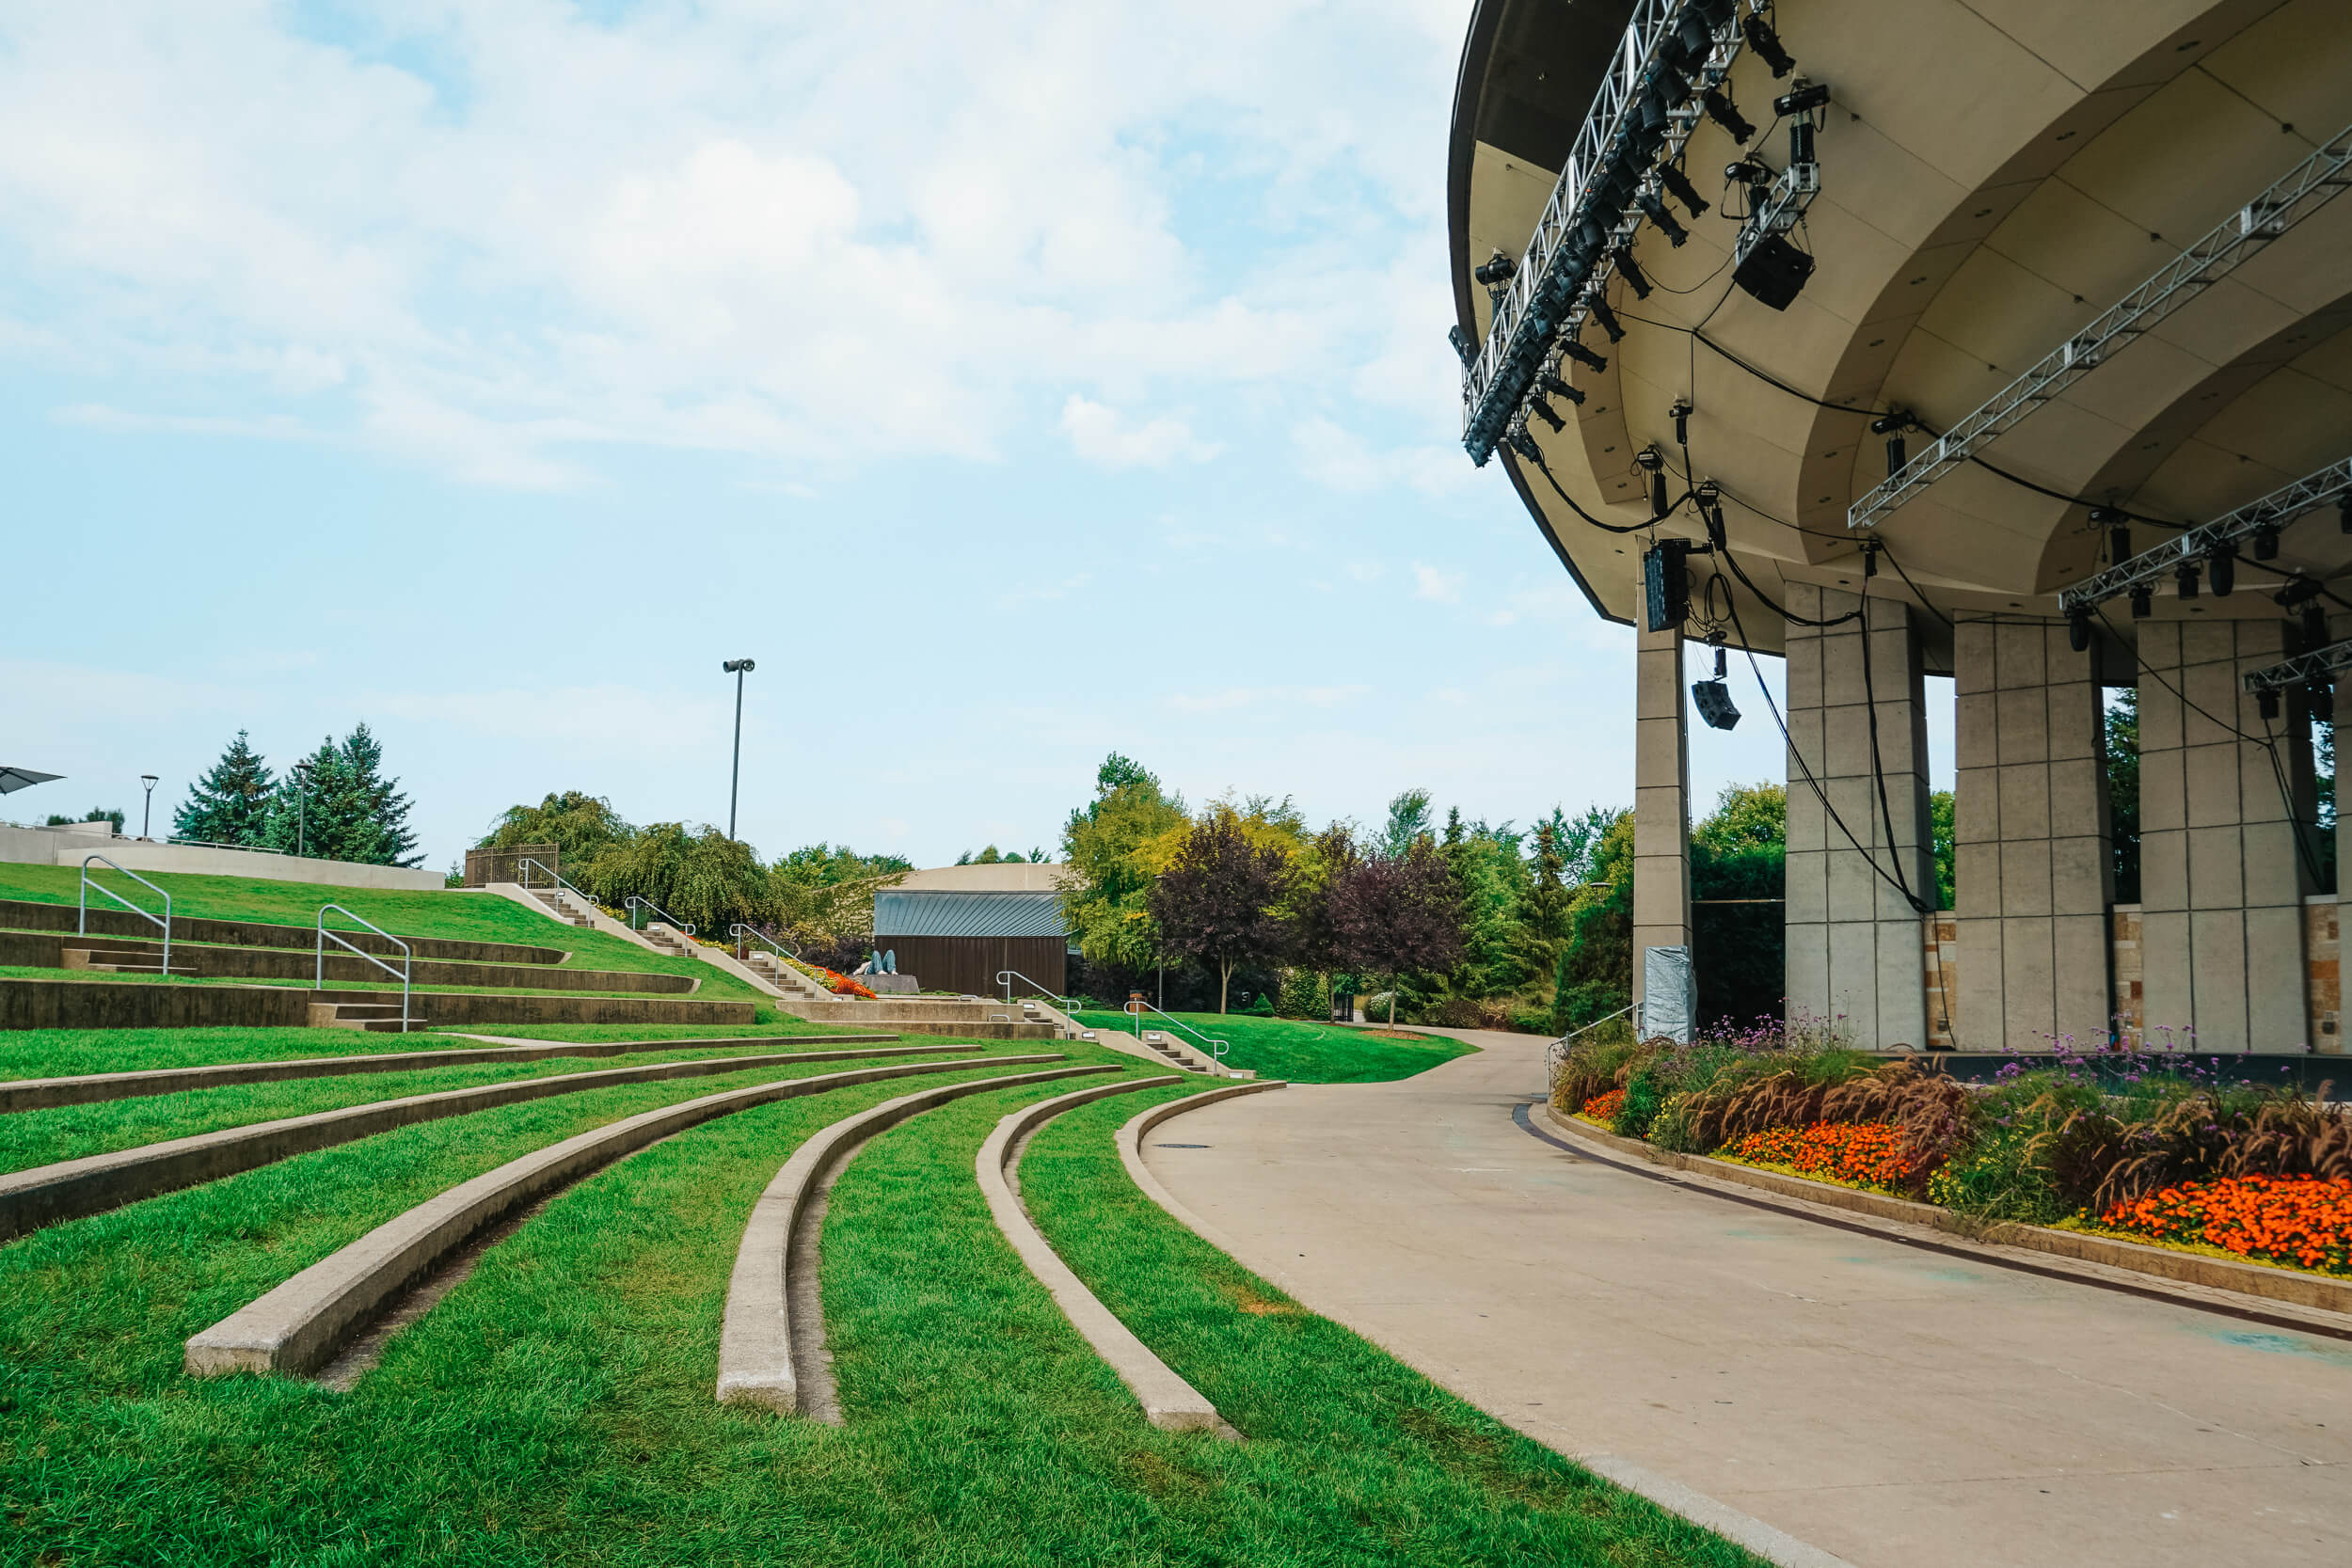 What To Know Before Visiting The Frederik Meijer Gardens